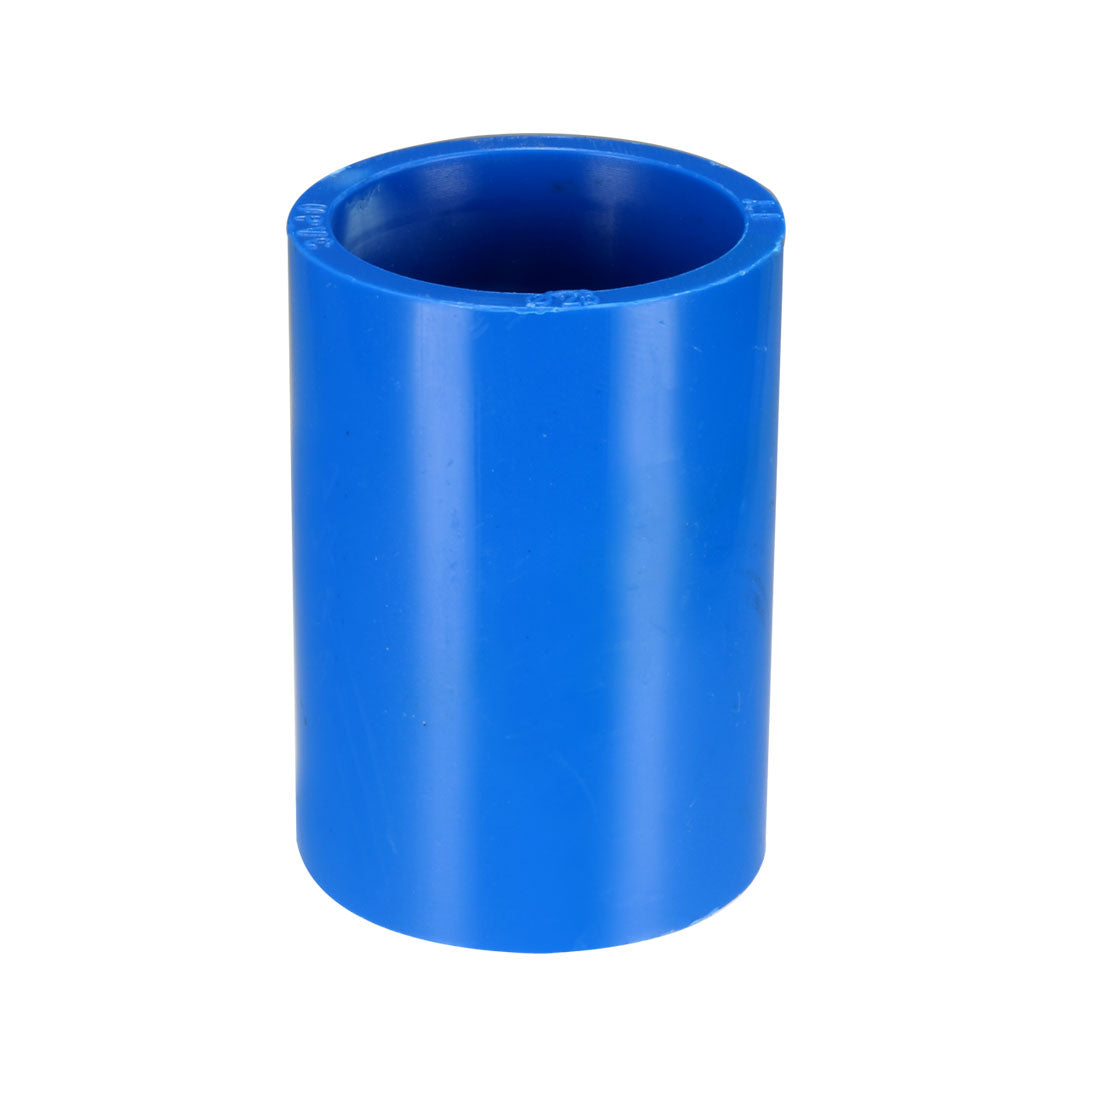 uxcell Uxcell 25mm Straight PVC Pipe Fitting Coupling Adapter Connector Blue 5Pcs